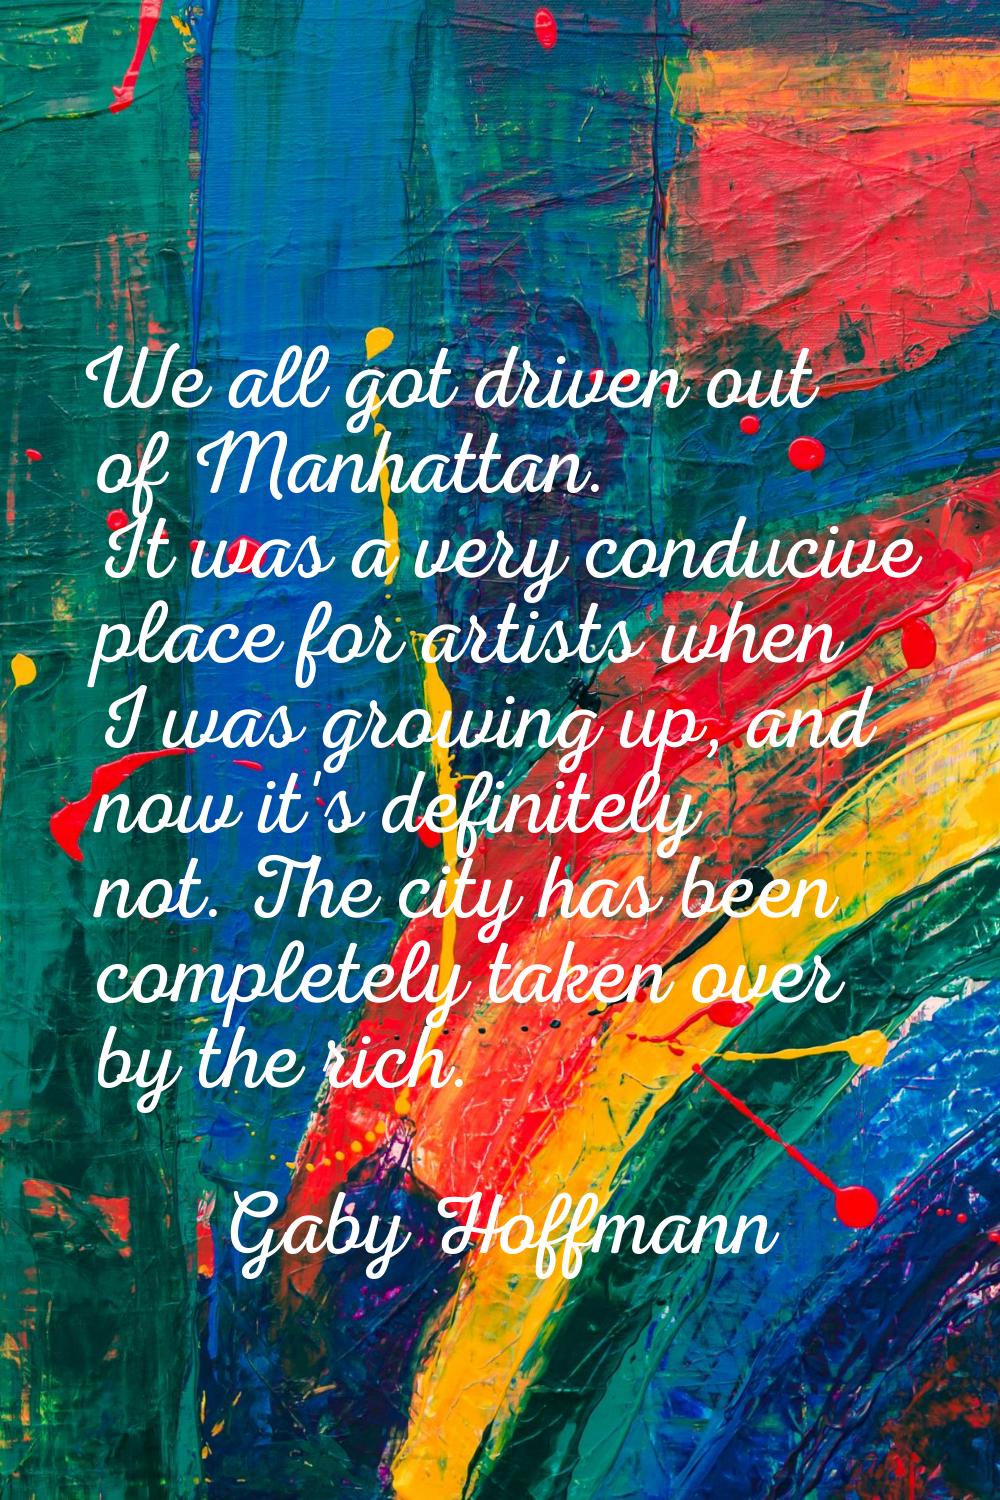 We all got driven out of Manhattan. It was a very conducive place for artists when I was growing up